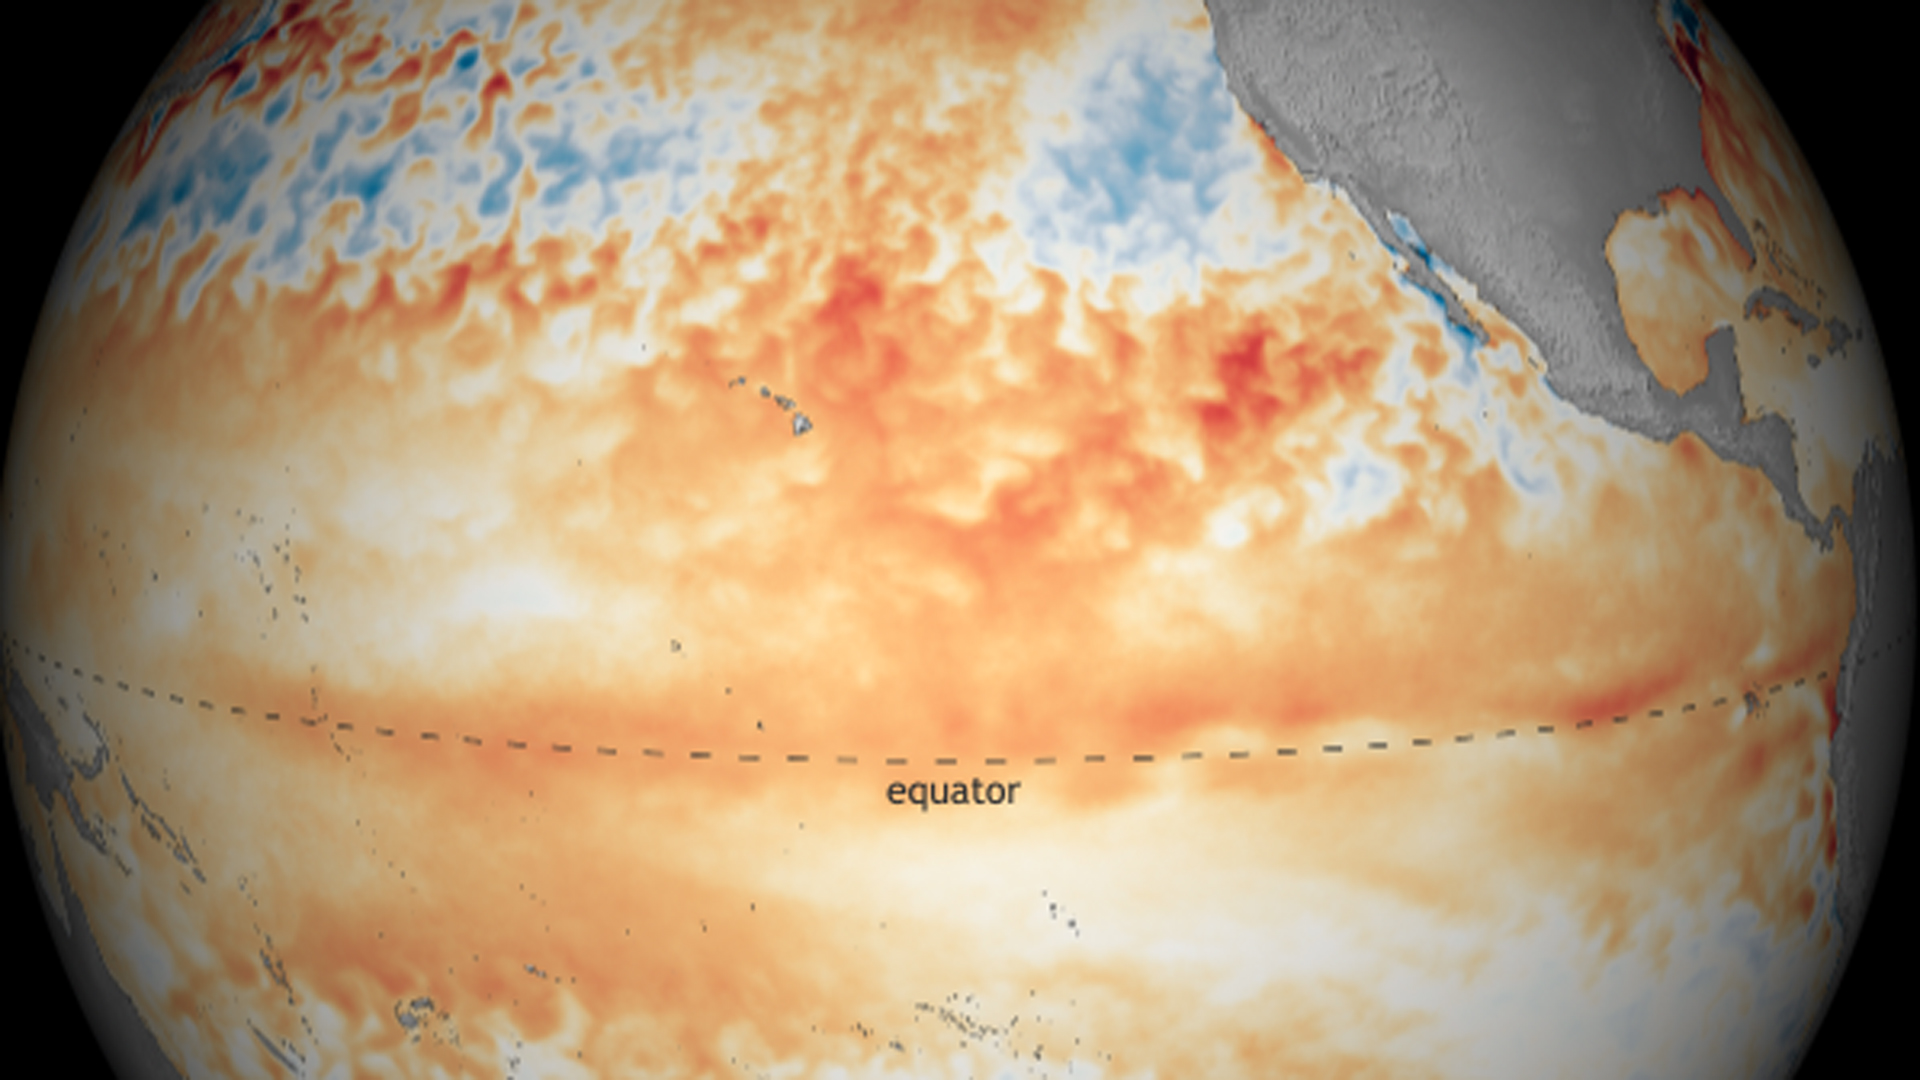 "A deep wave of warm water spreading eastward across the tropical Pacific in May provides confidence in June's forecast that El Niño will last through summer (66% chance)," according to NOAA, which released this image. "The odds that El Niño will persist through fall and winter have declined slightly in the past month (from 55-60% to 50-55%)."